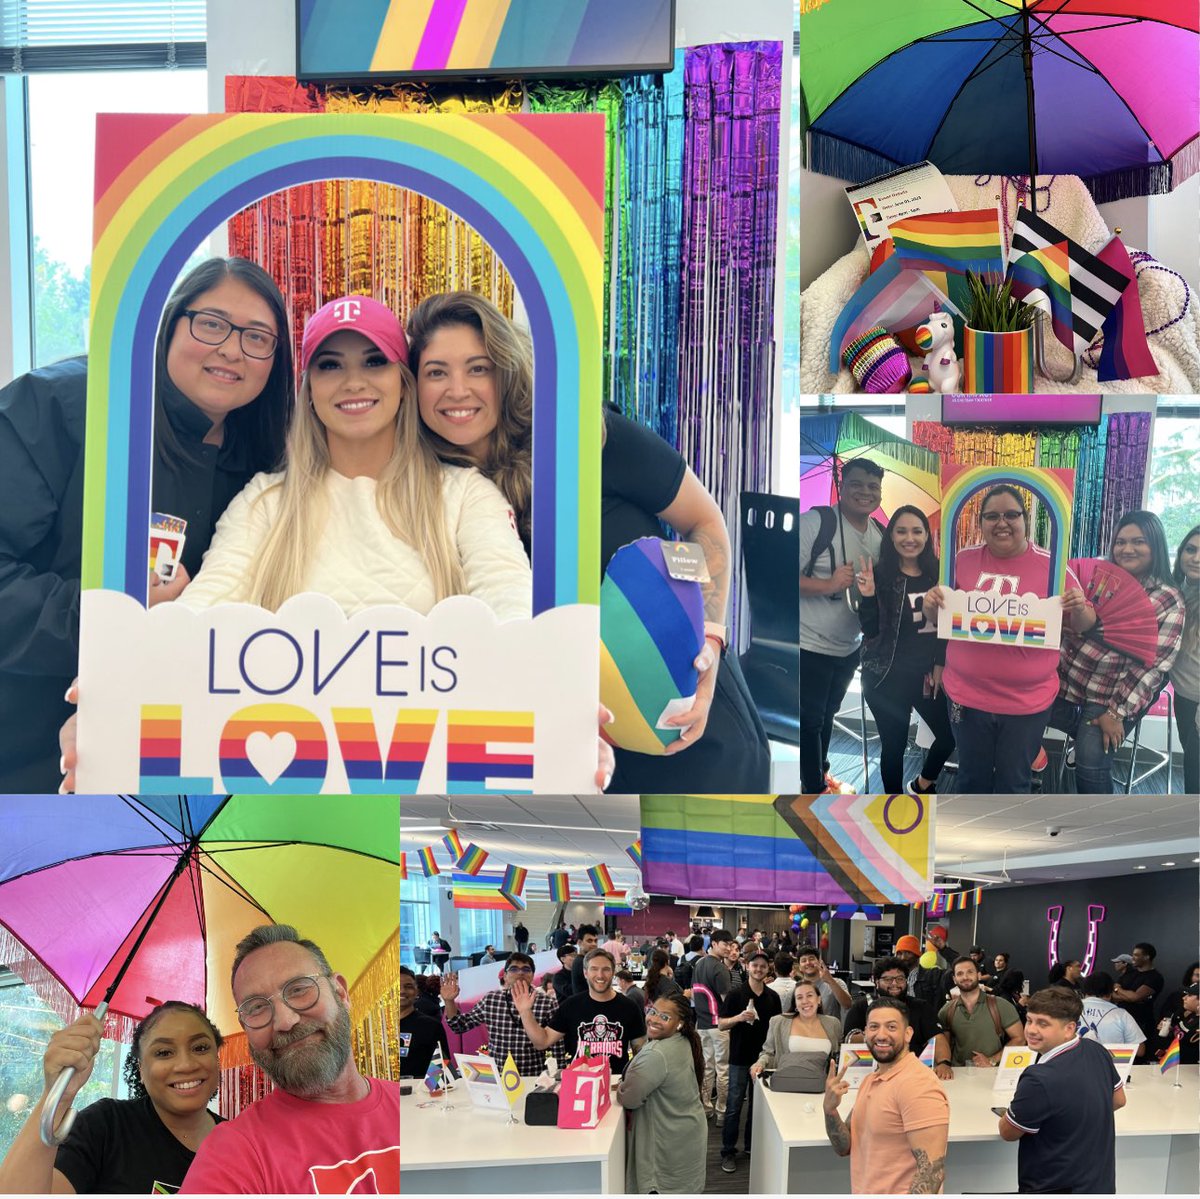 The Sales Development Team had a blast celebrating Pride Month! Thank you for hosting this awesome event Frisco HQ DE&I TEAM! @iamlolalissy @YvonneMorales03